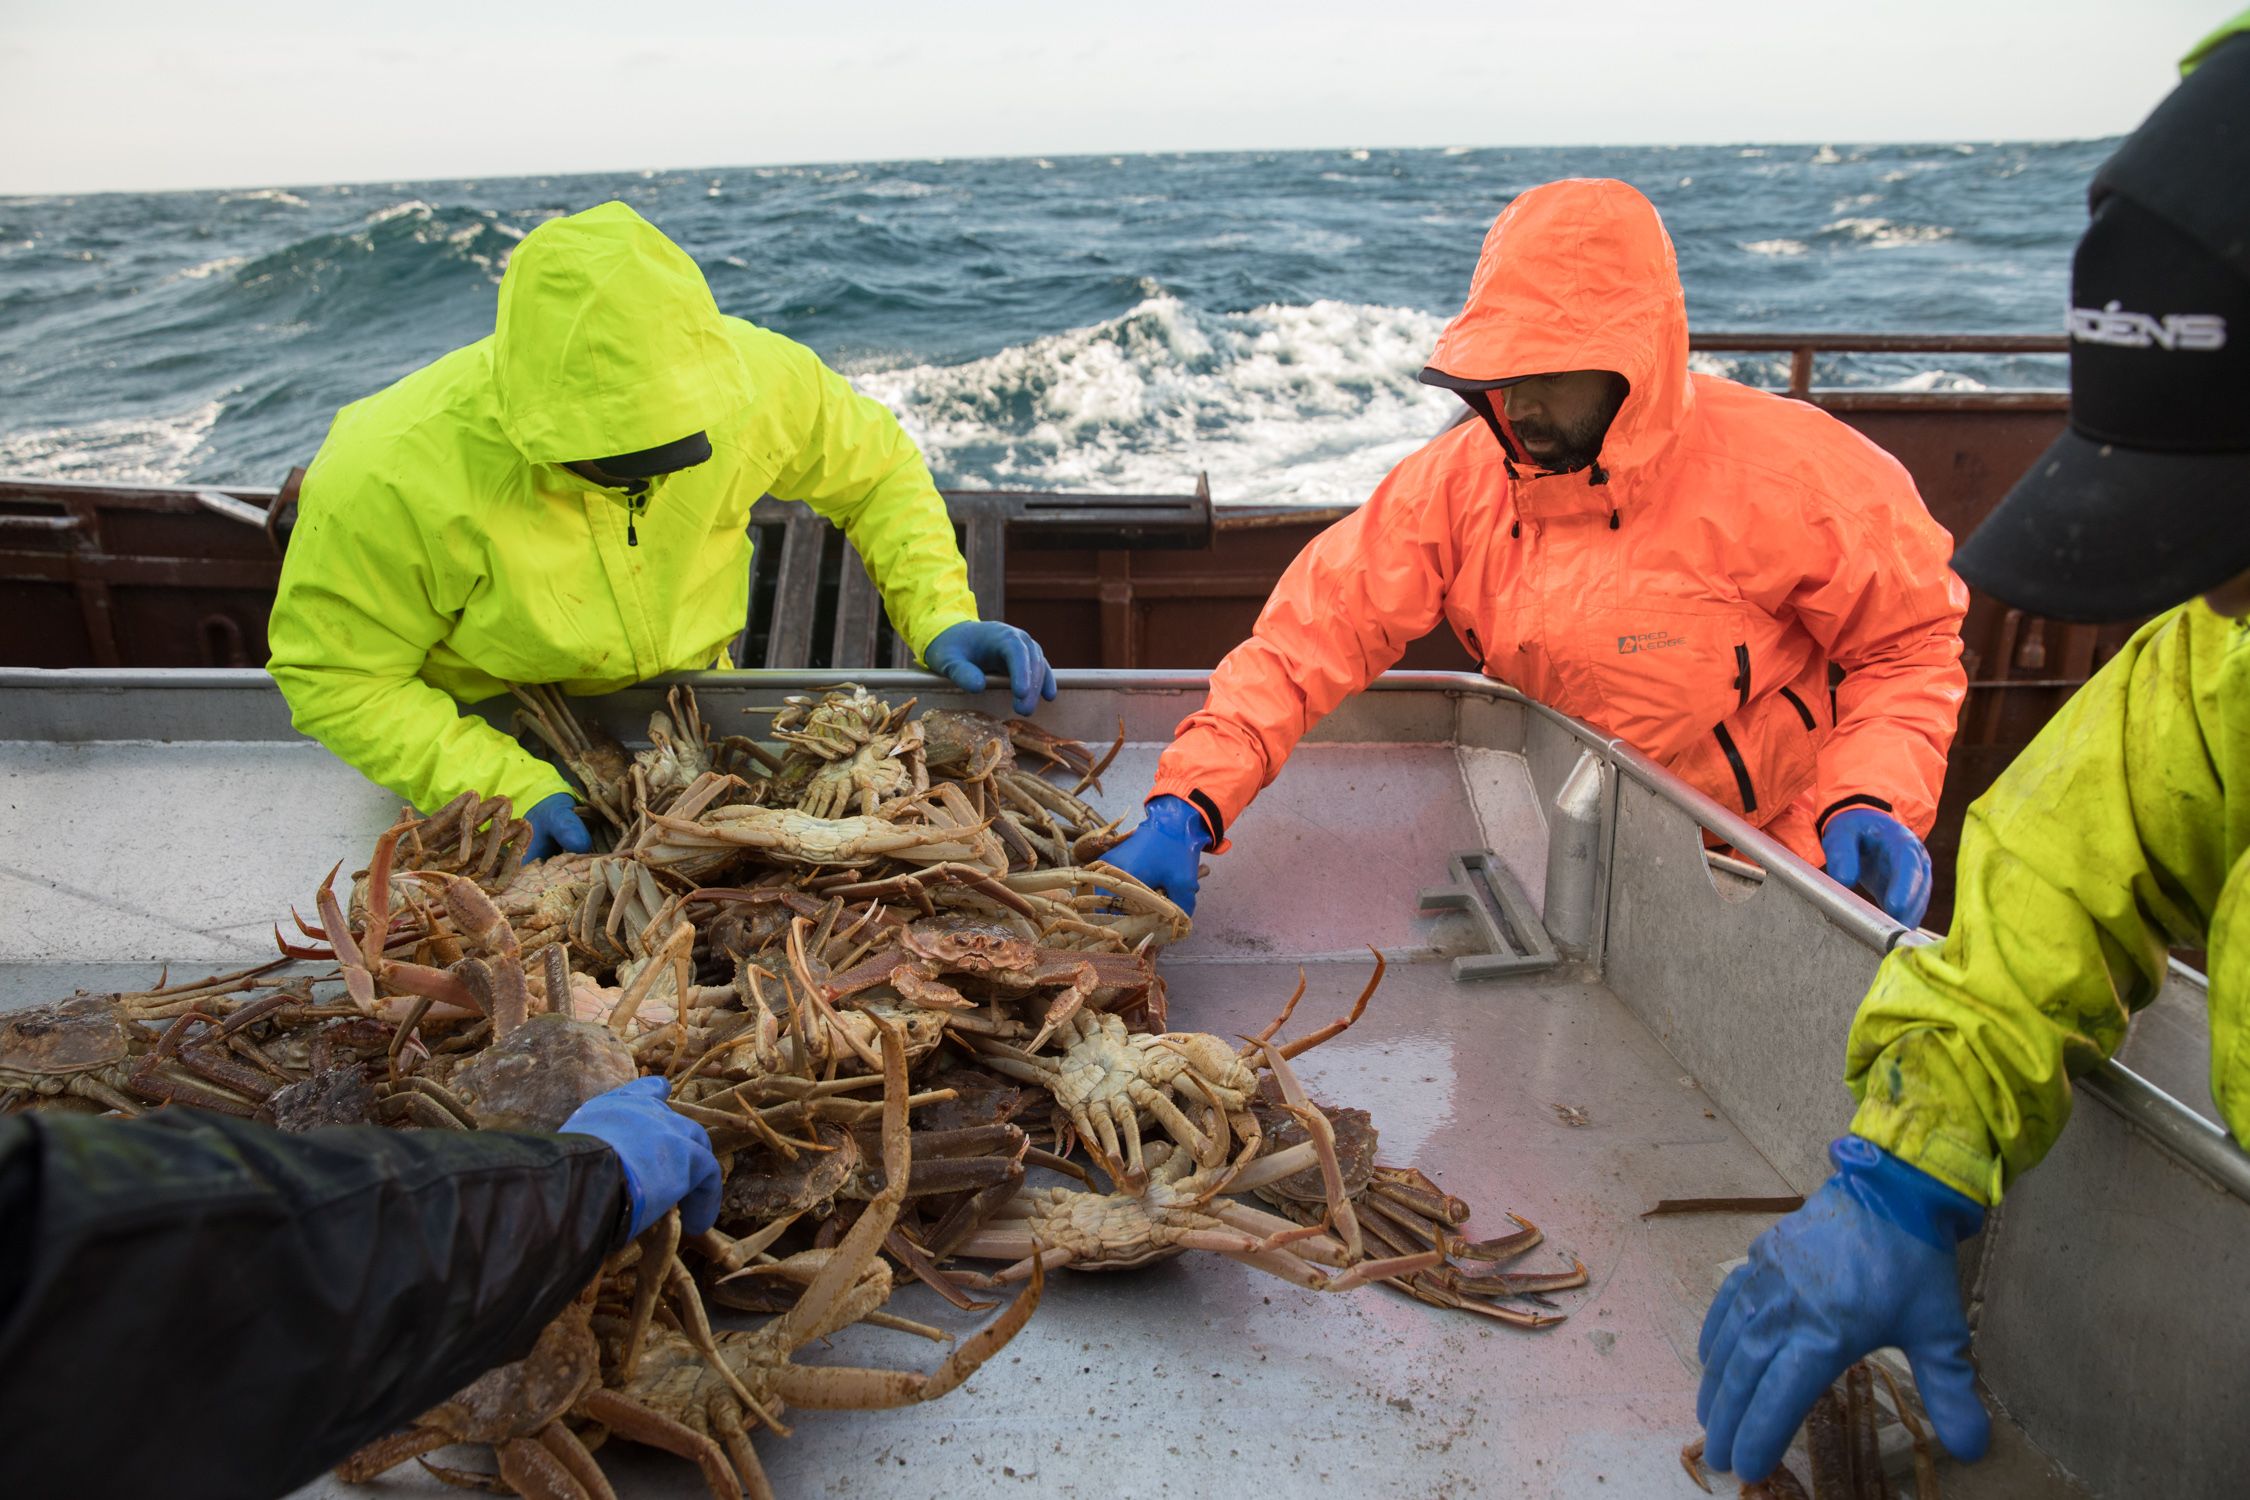 Bering Sea crabbers make online appeal for support